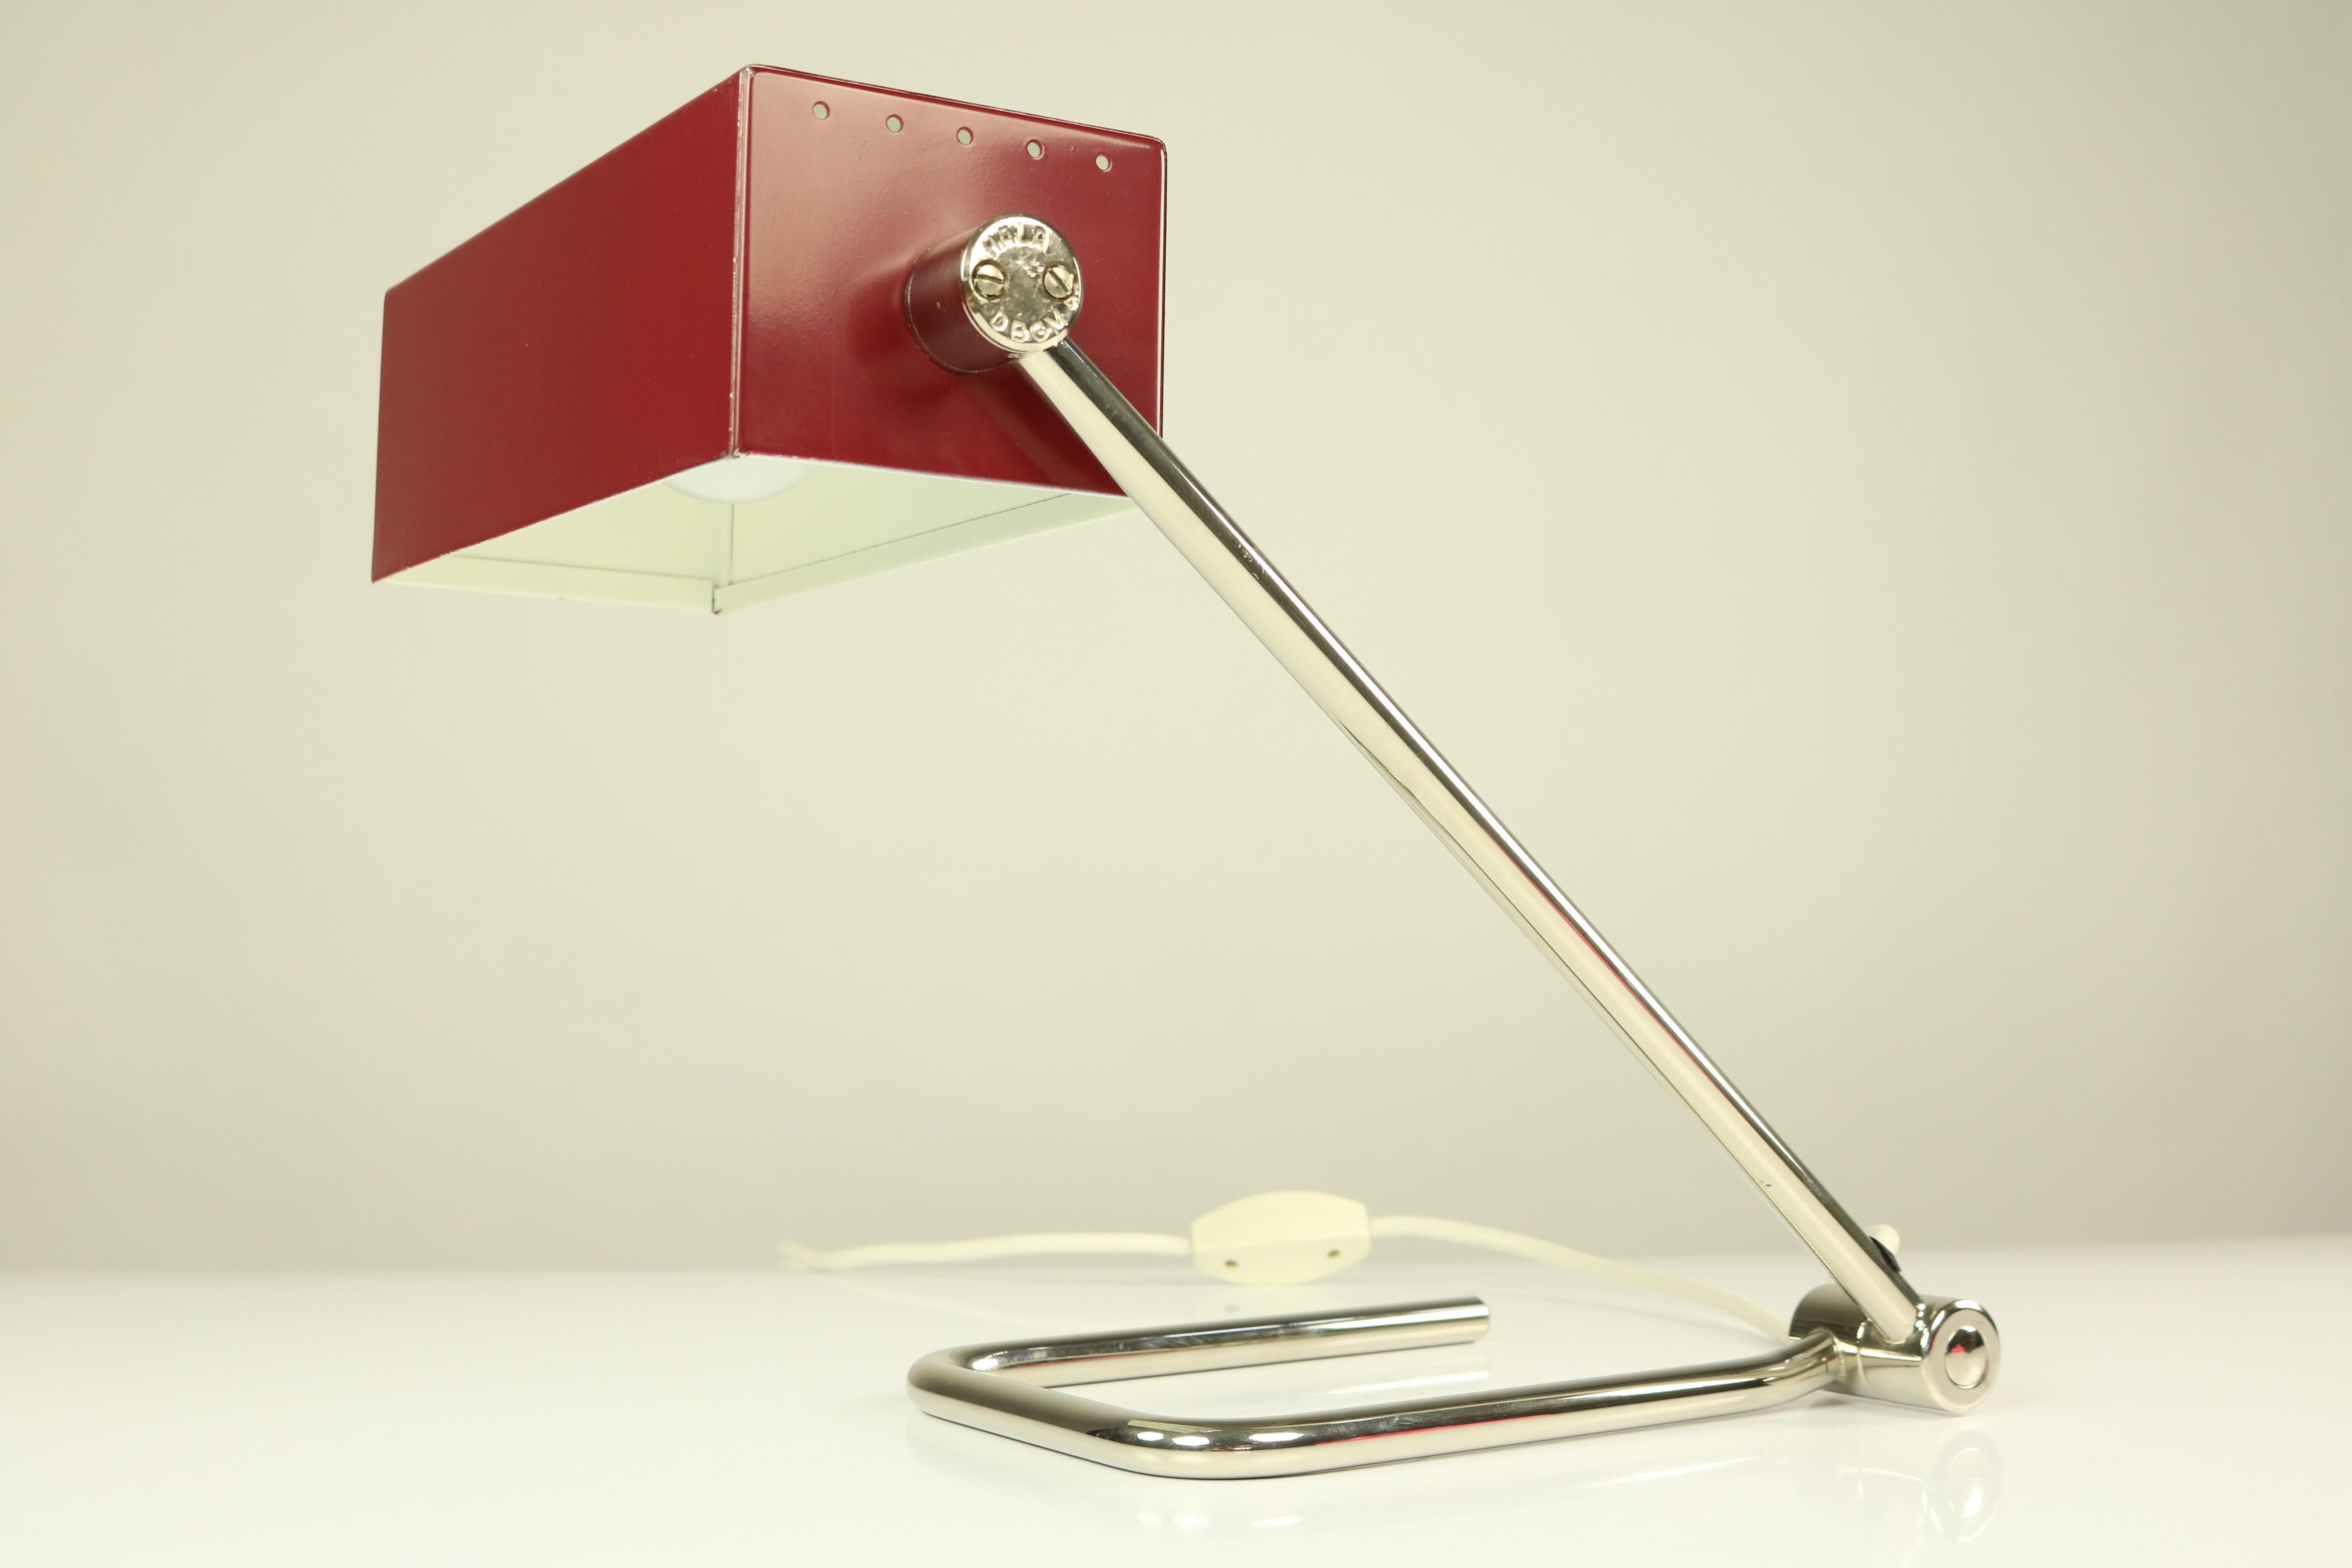 20th Century Midcentury Table Lamp by Hala Germany Wine Red and Chrome Vintage, 1950s-1960s For Sale